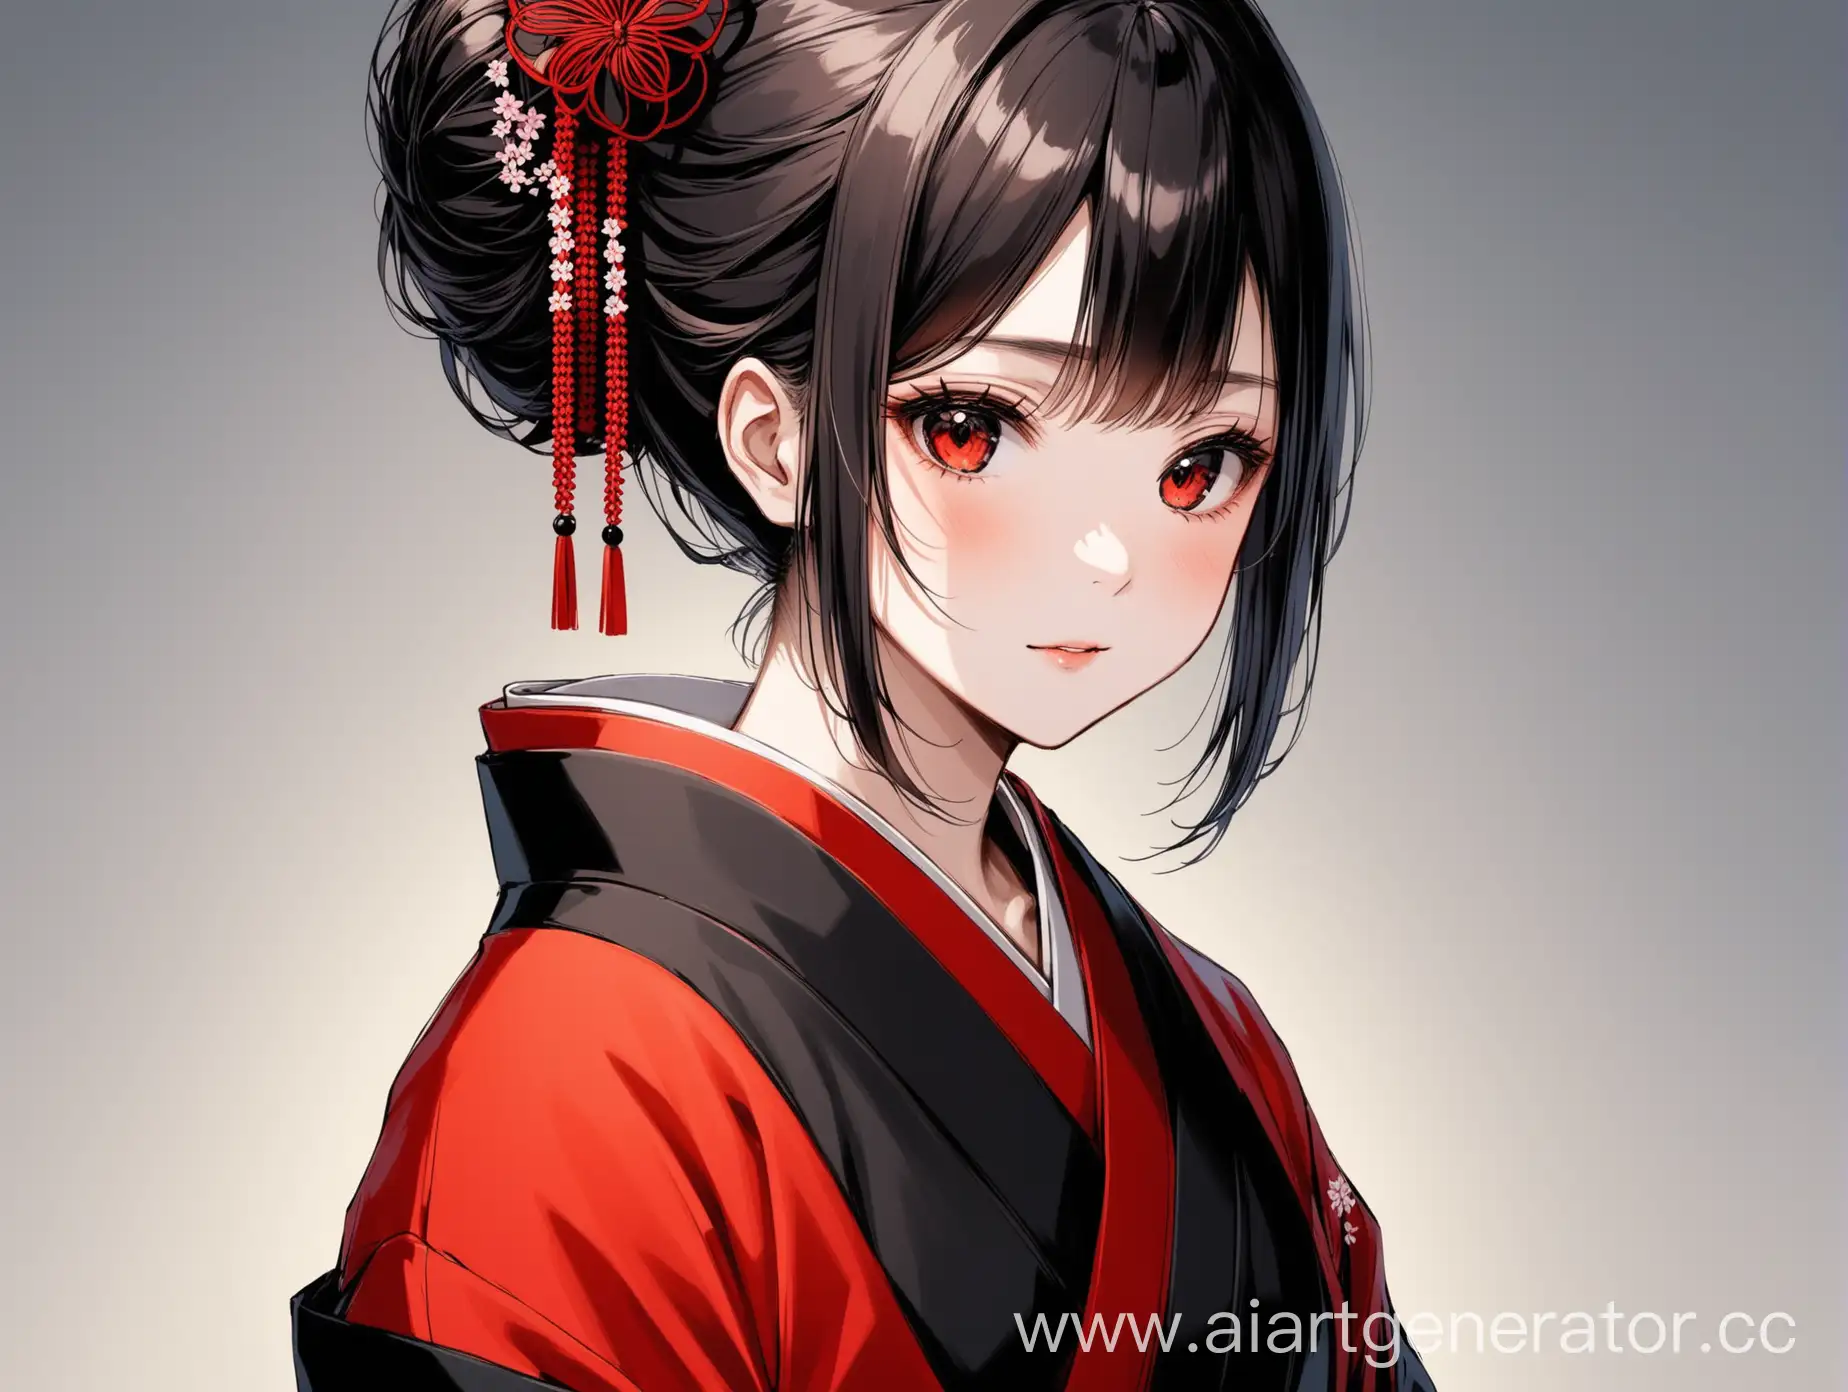 Girl-in-Elegant-Red-and-Black-Kimono-Standing-Serenely